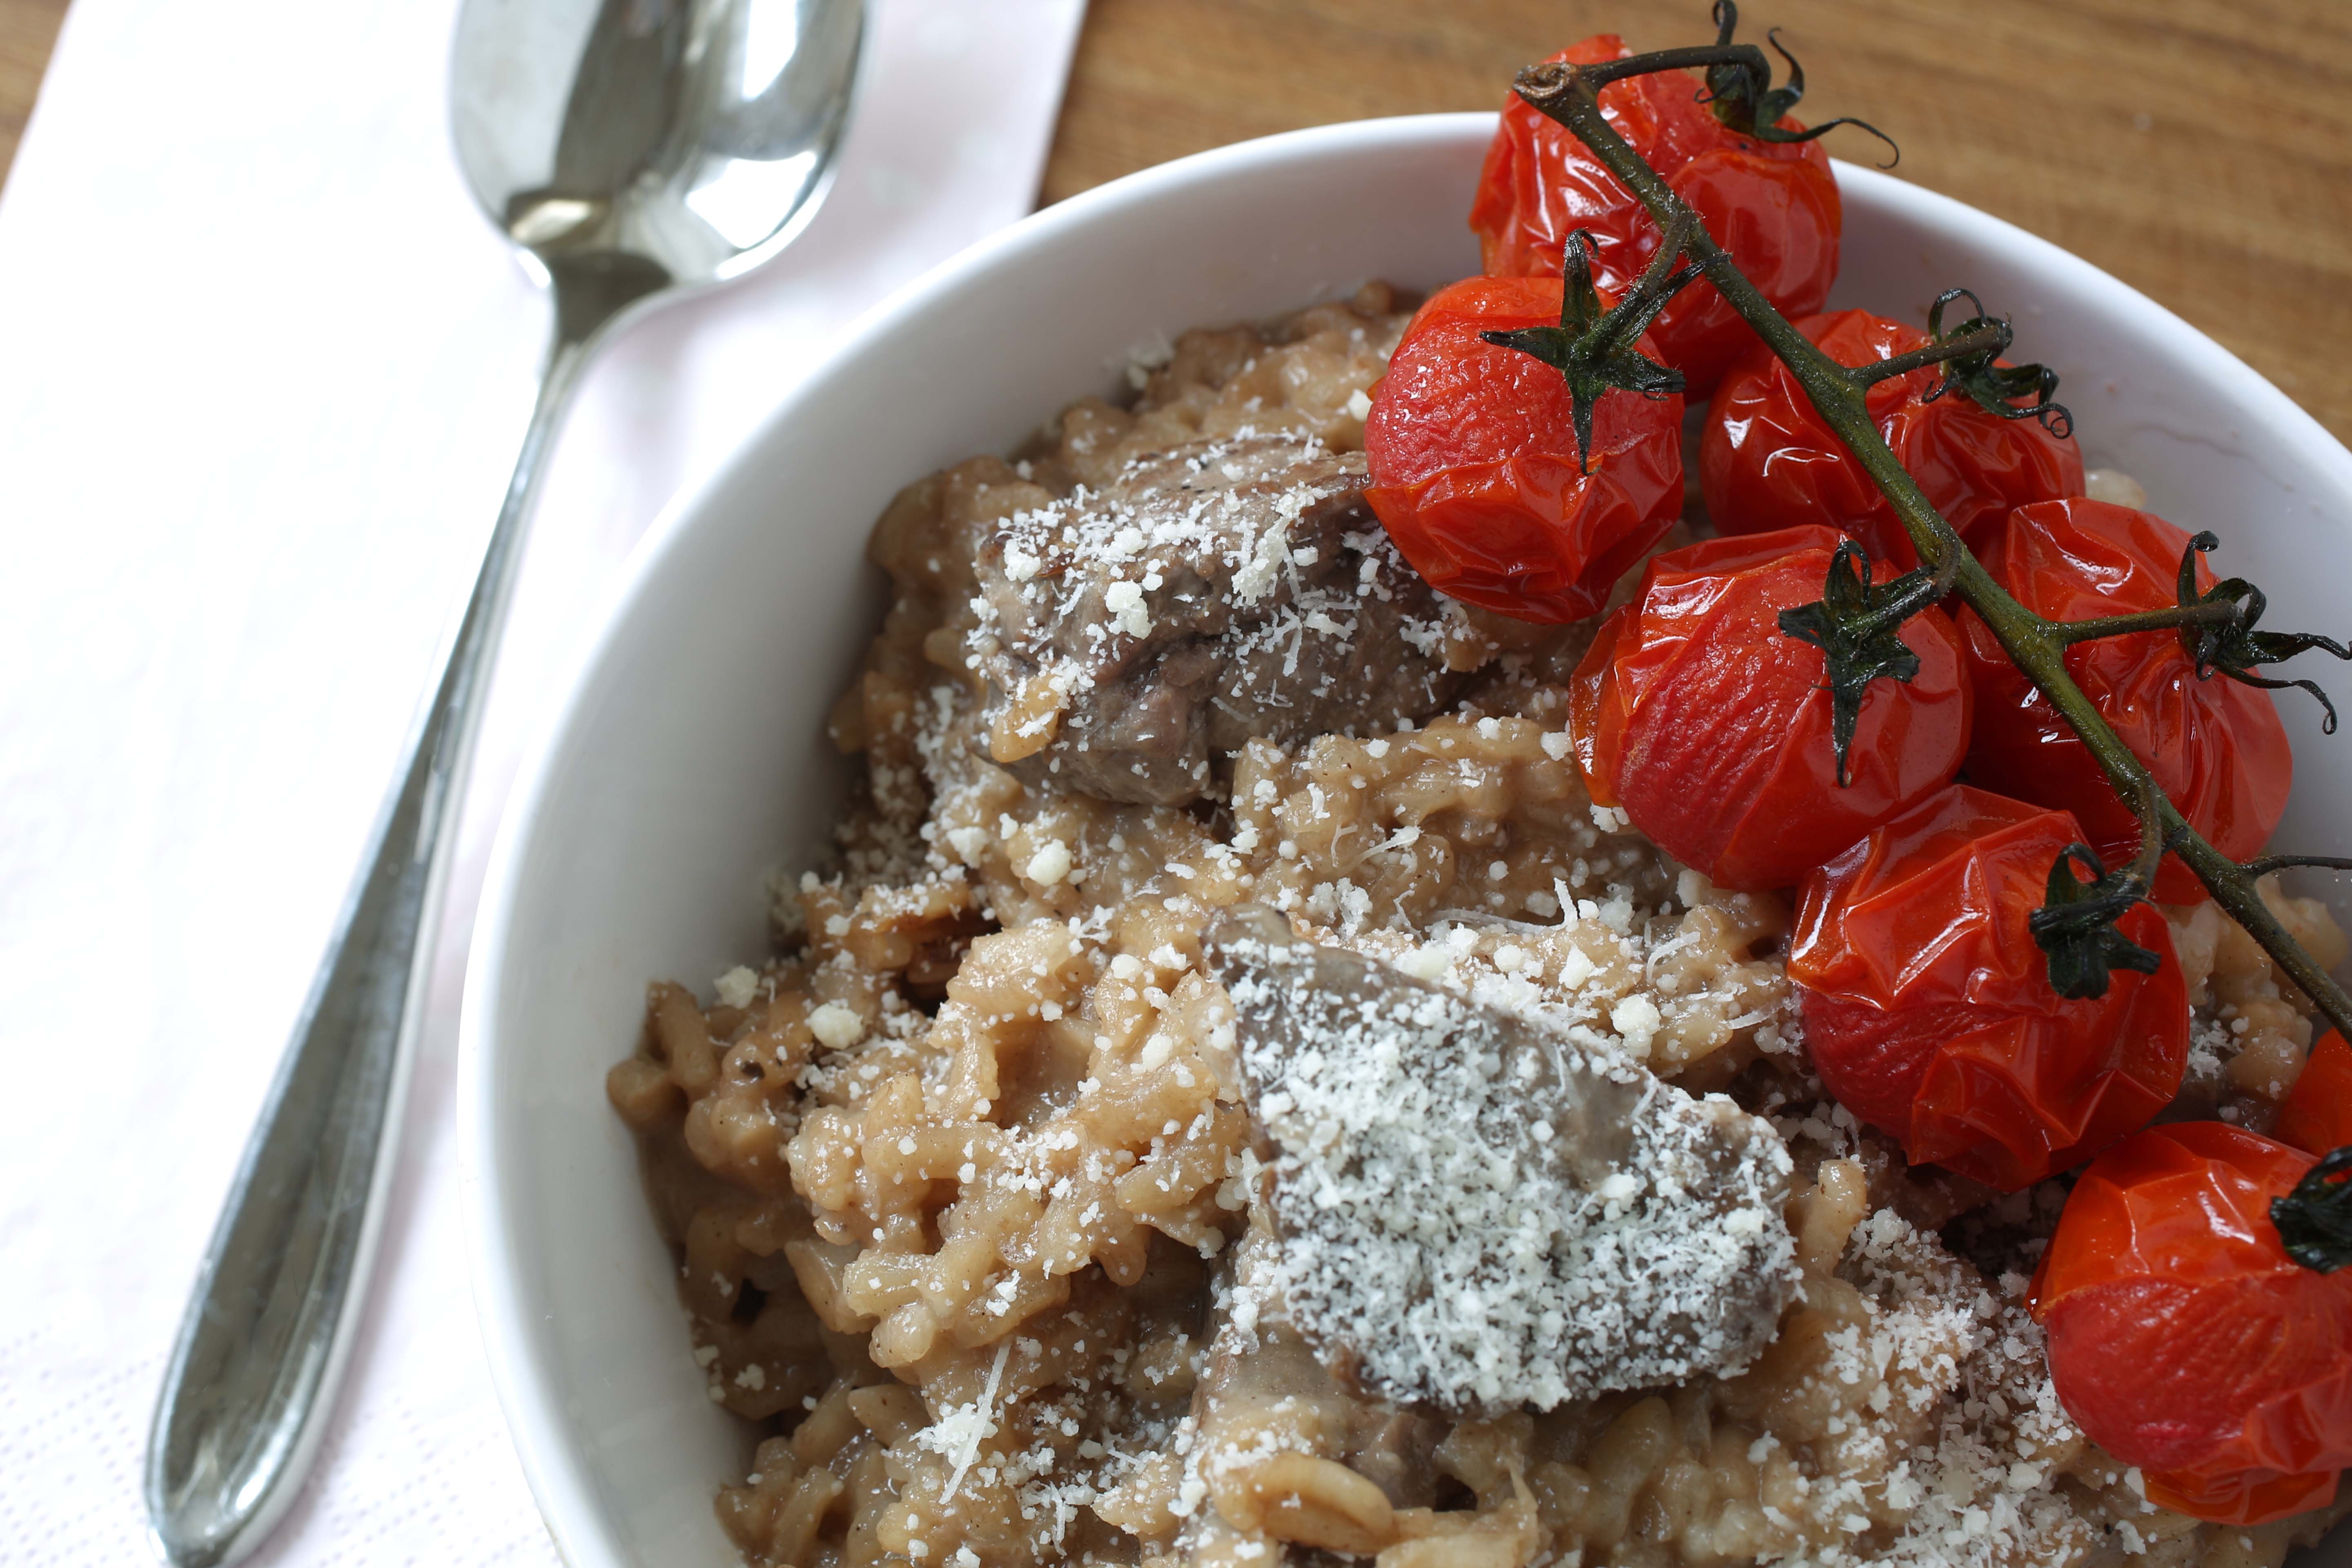 How to make Beef and Red Wine Risotto